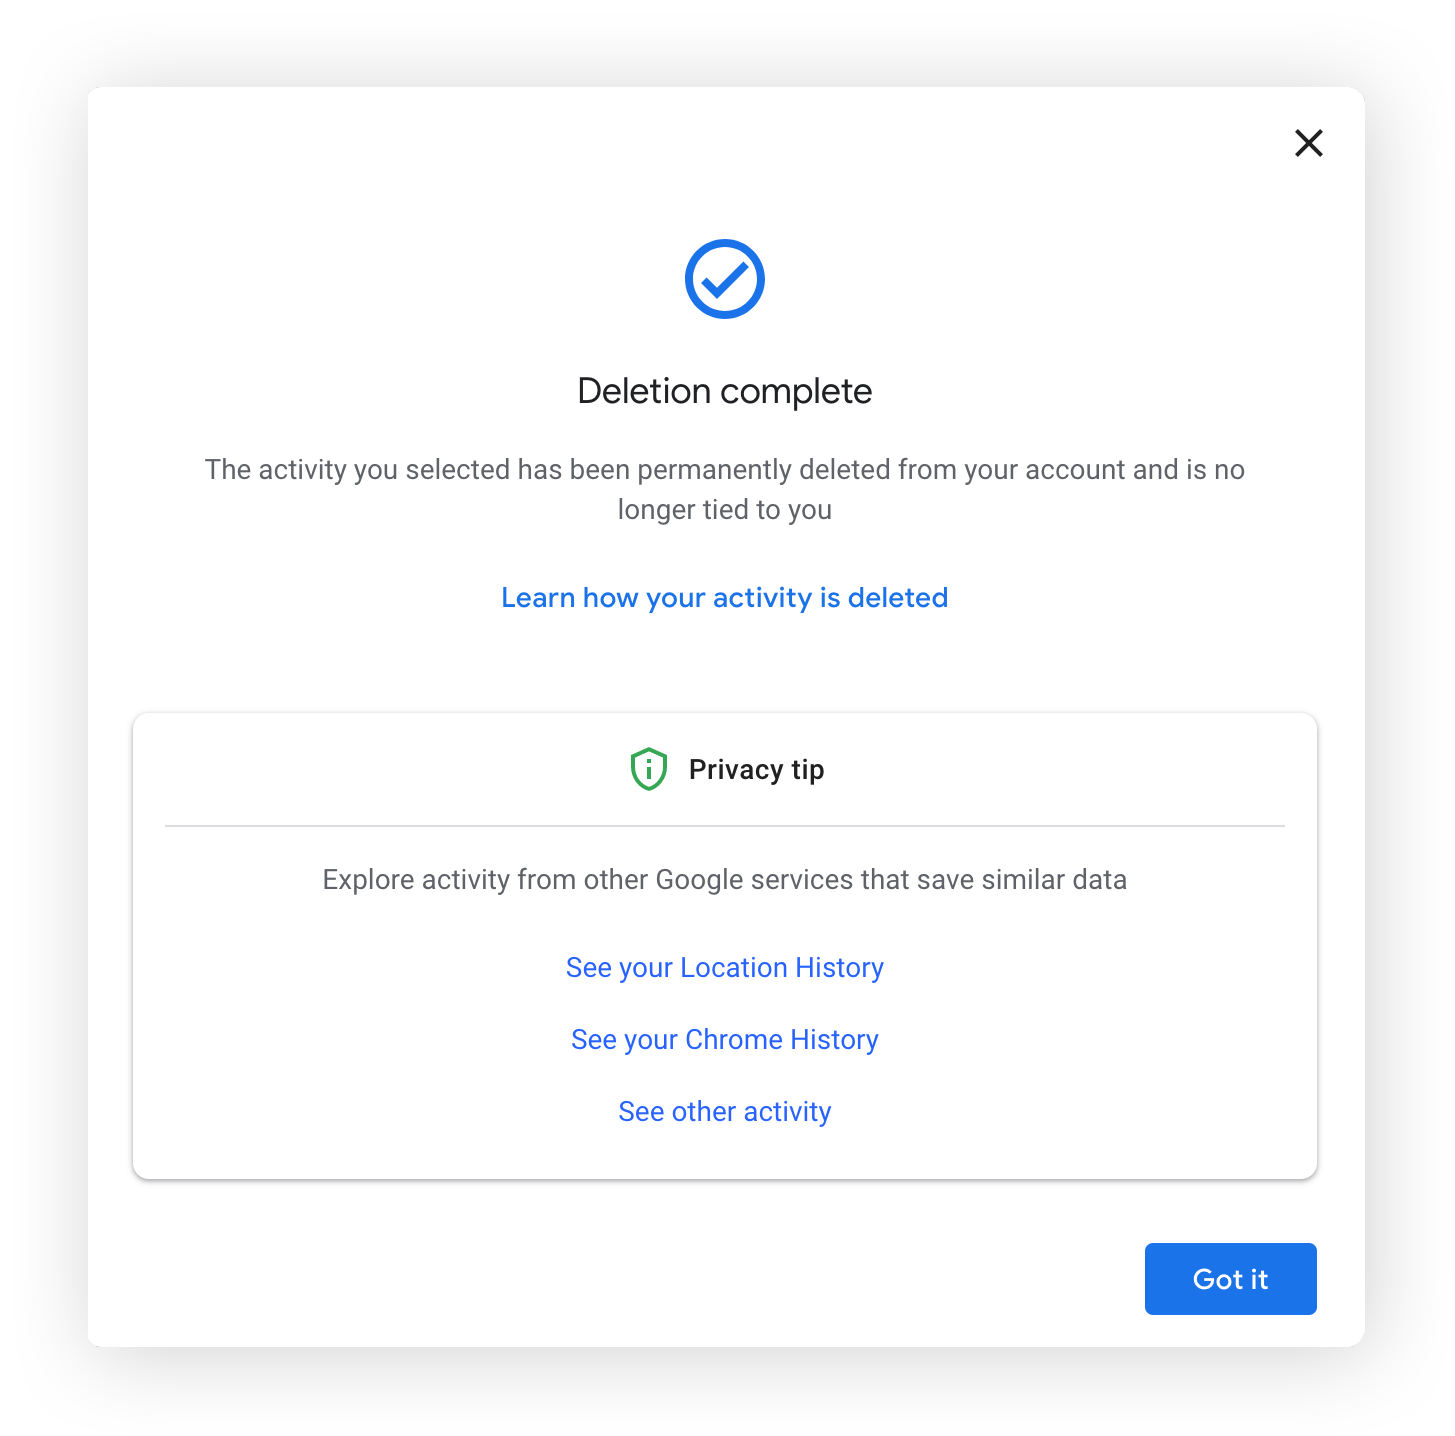 Tips for managing privacy with Google Activity controls and auto-delete settings